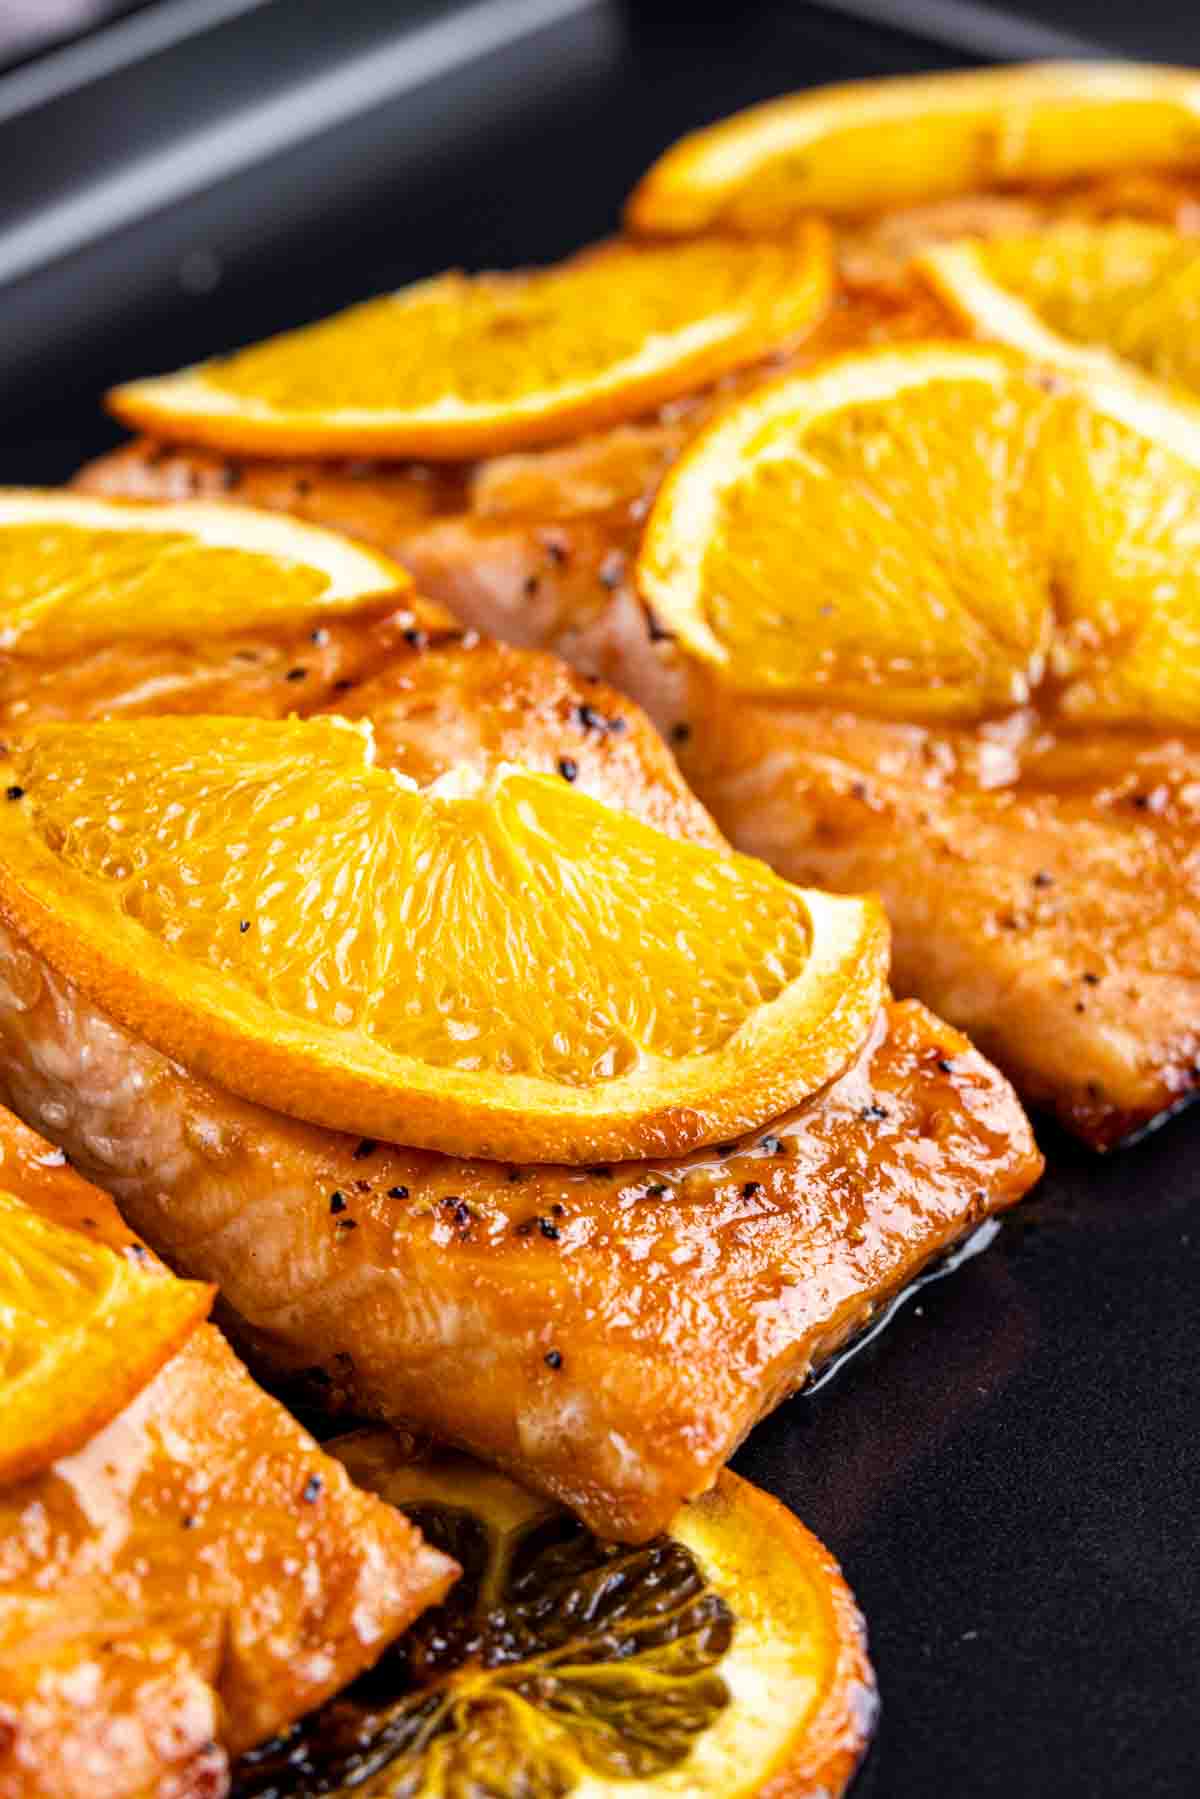 Orange Glazed Salmon topped with orange slices on a cooking surface.